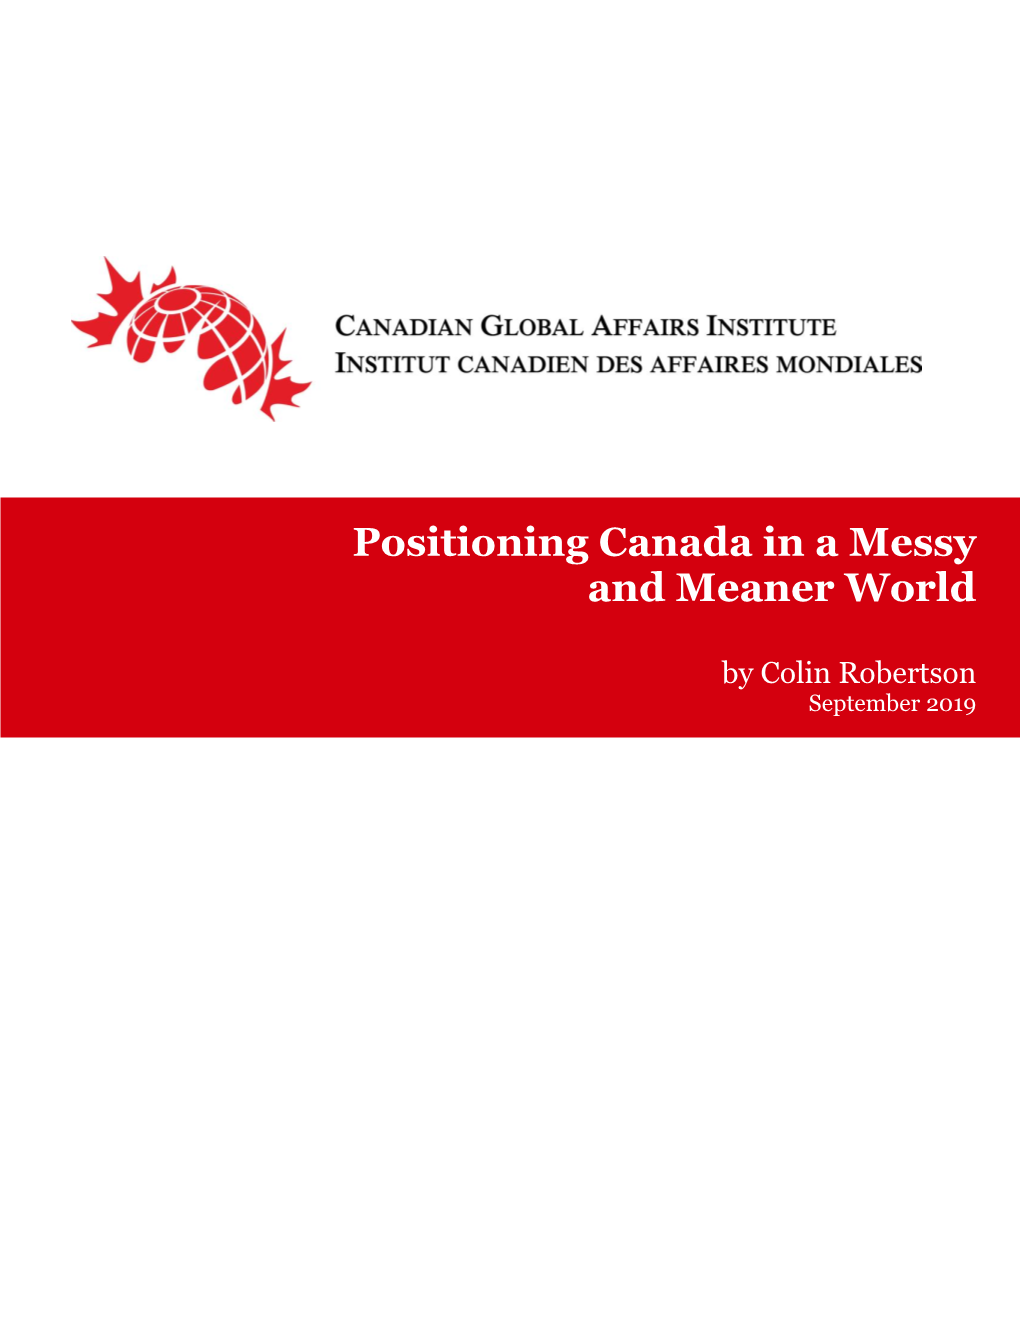 Positioning Canada in a Messy and Meaner World